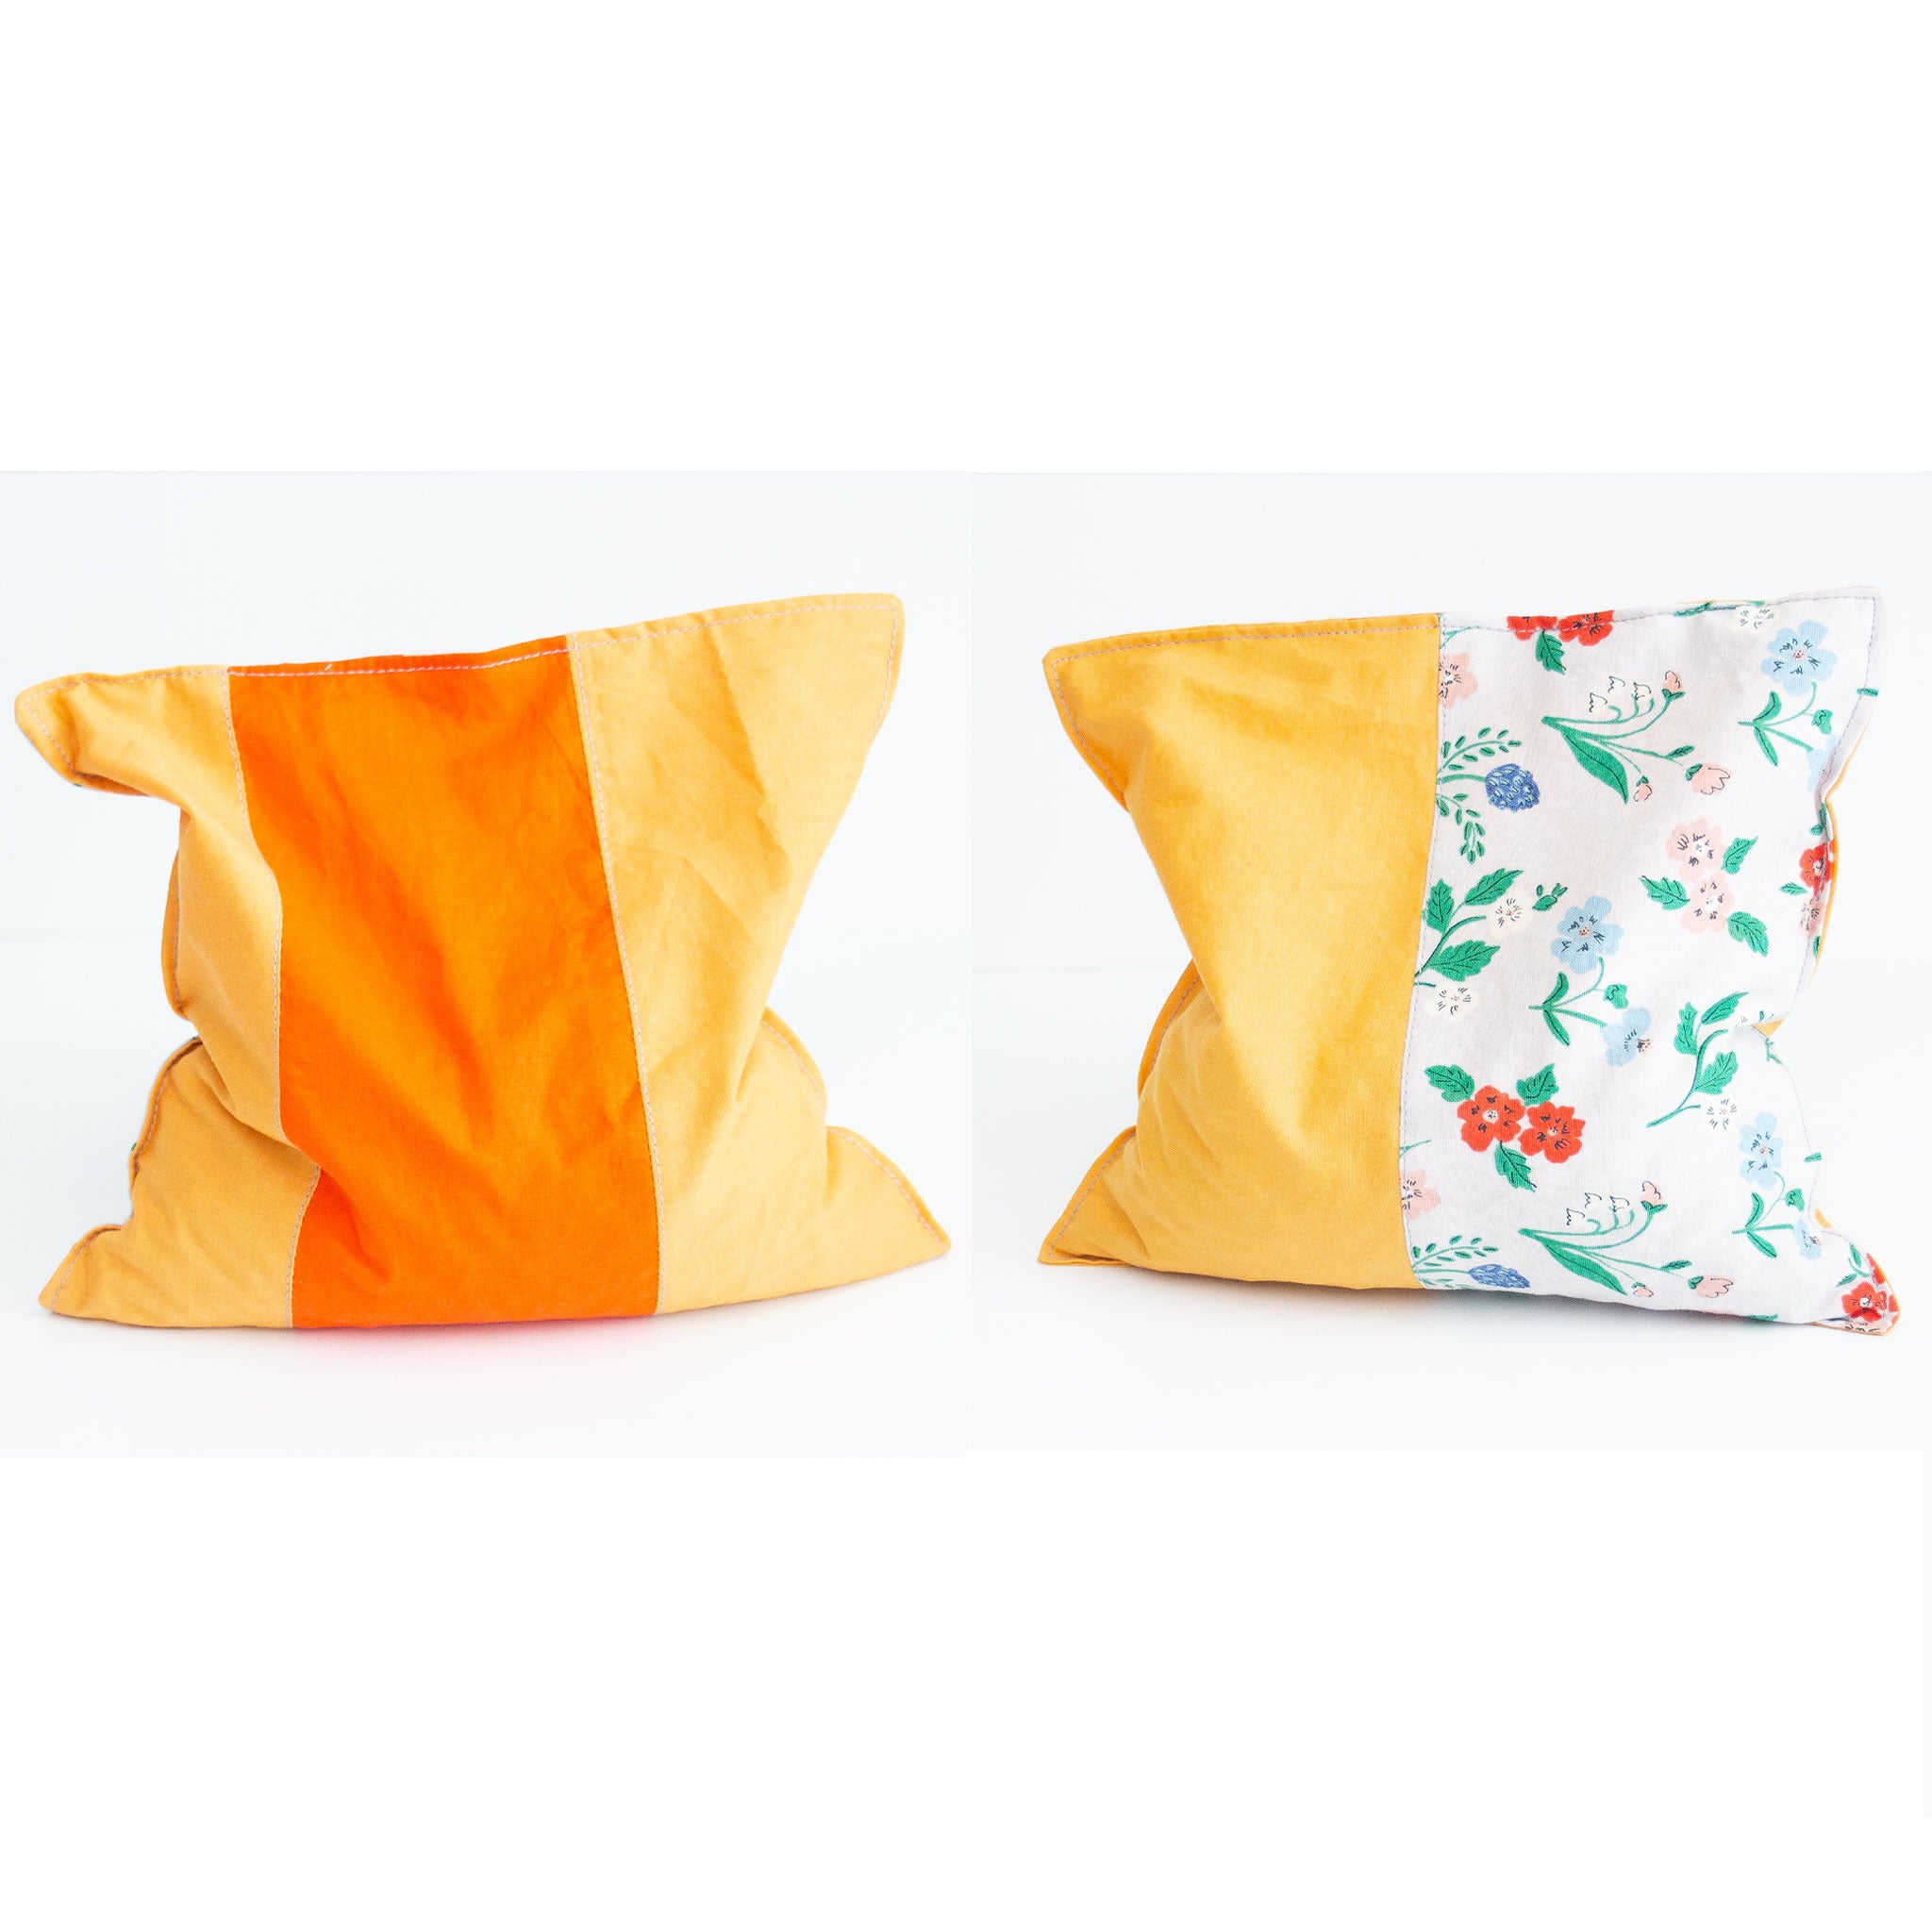 Two grain bags sit side by side showing front and back patchwork patterns. Front and back of patchwork (floral print and solid light and dark orange) rectangle cherry pit grain bag. Sit on white background.